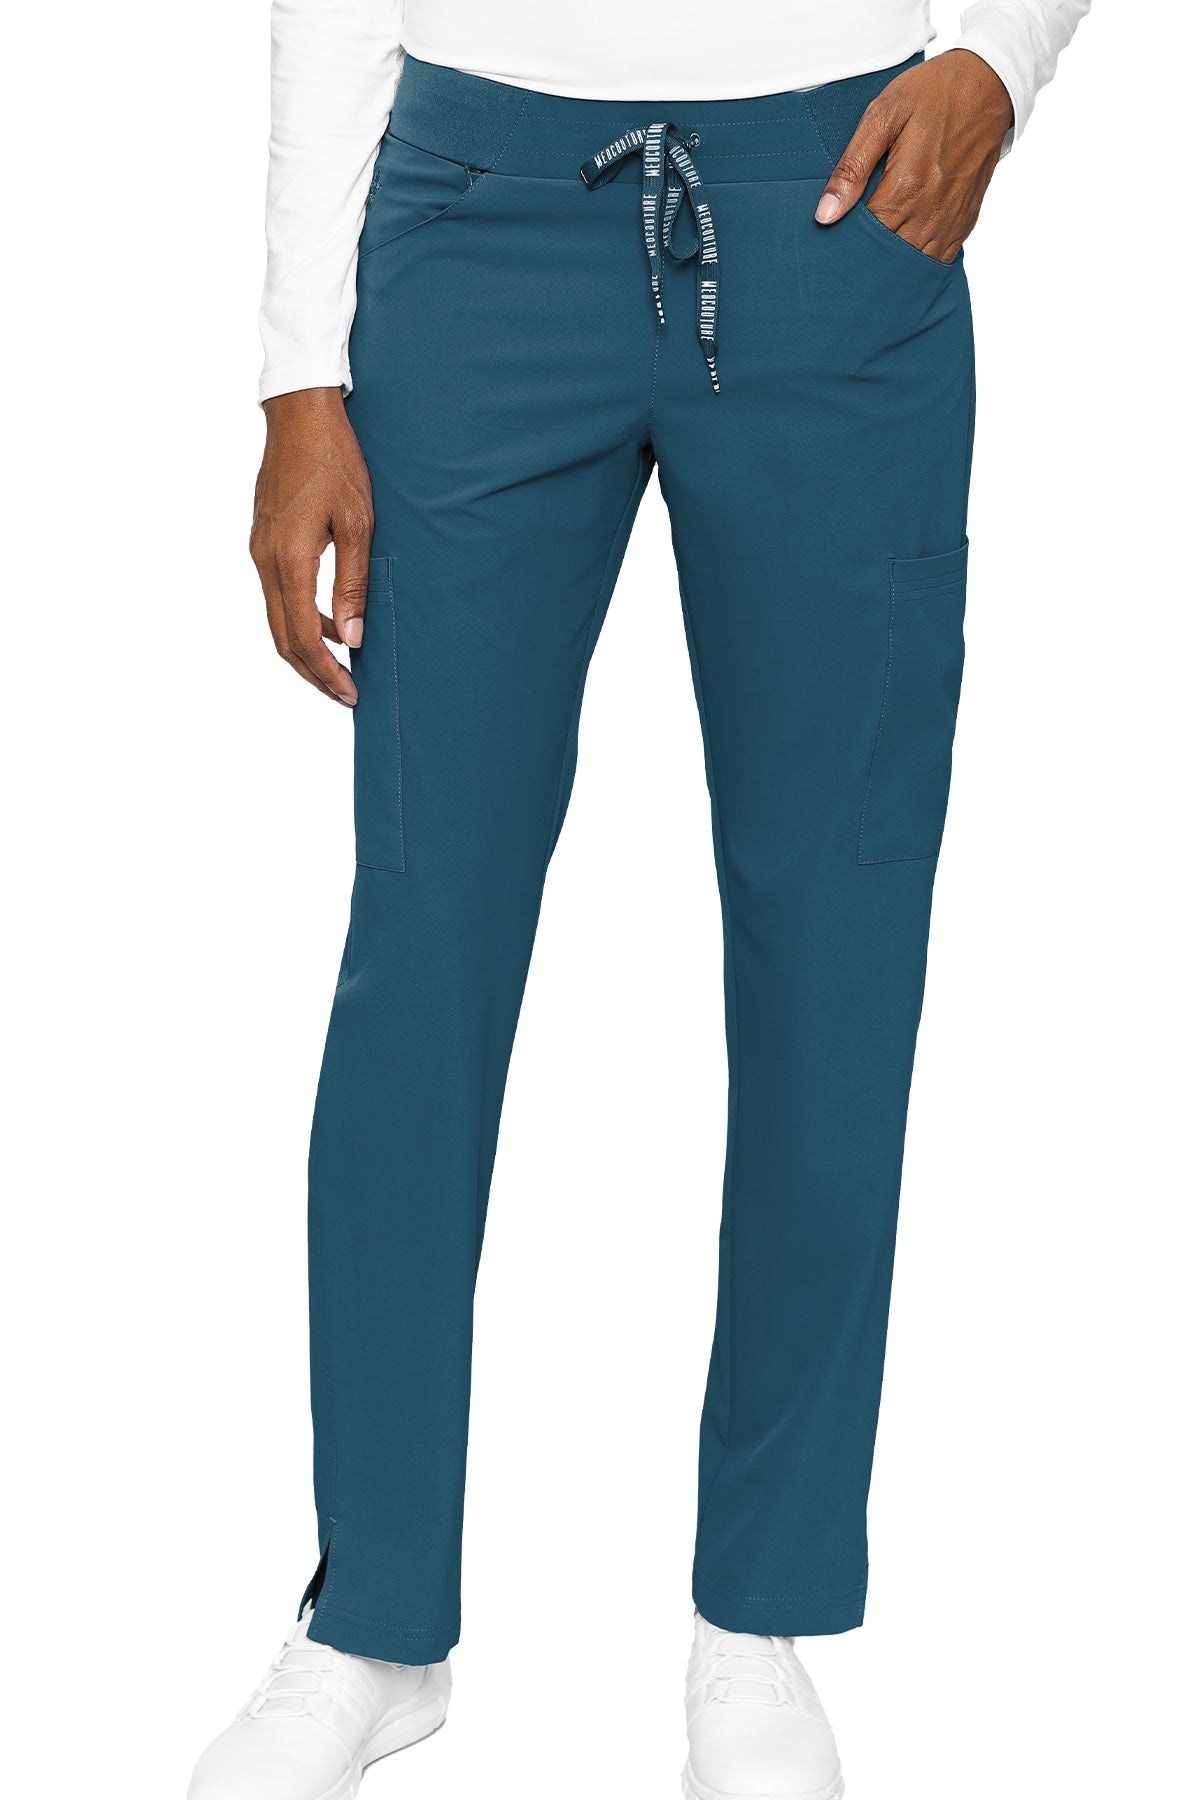 Med Couture Yoga Waist Pant